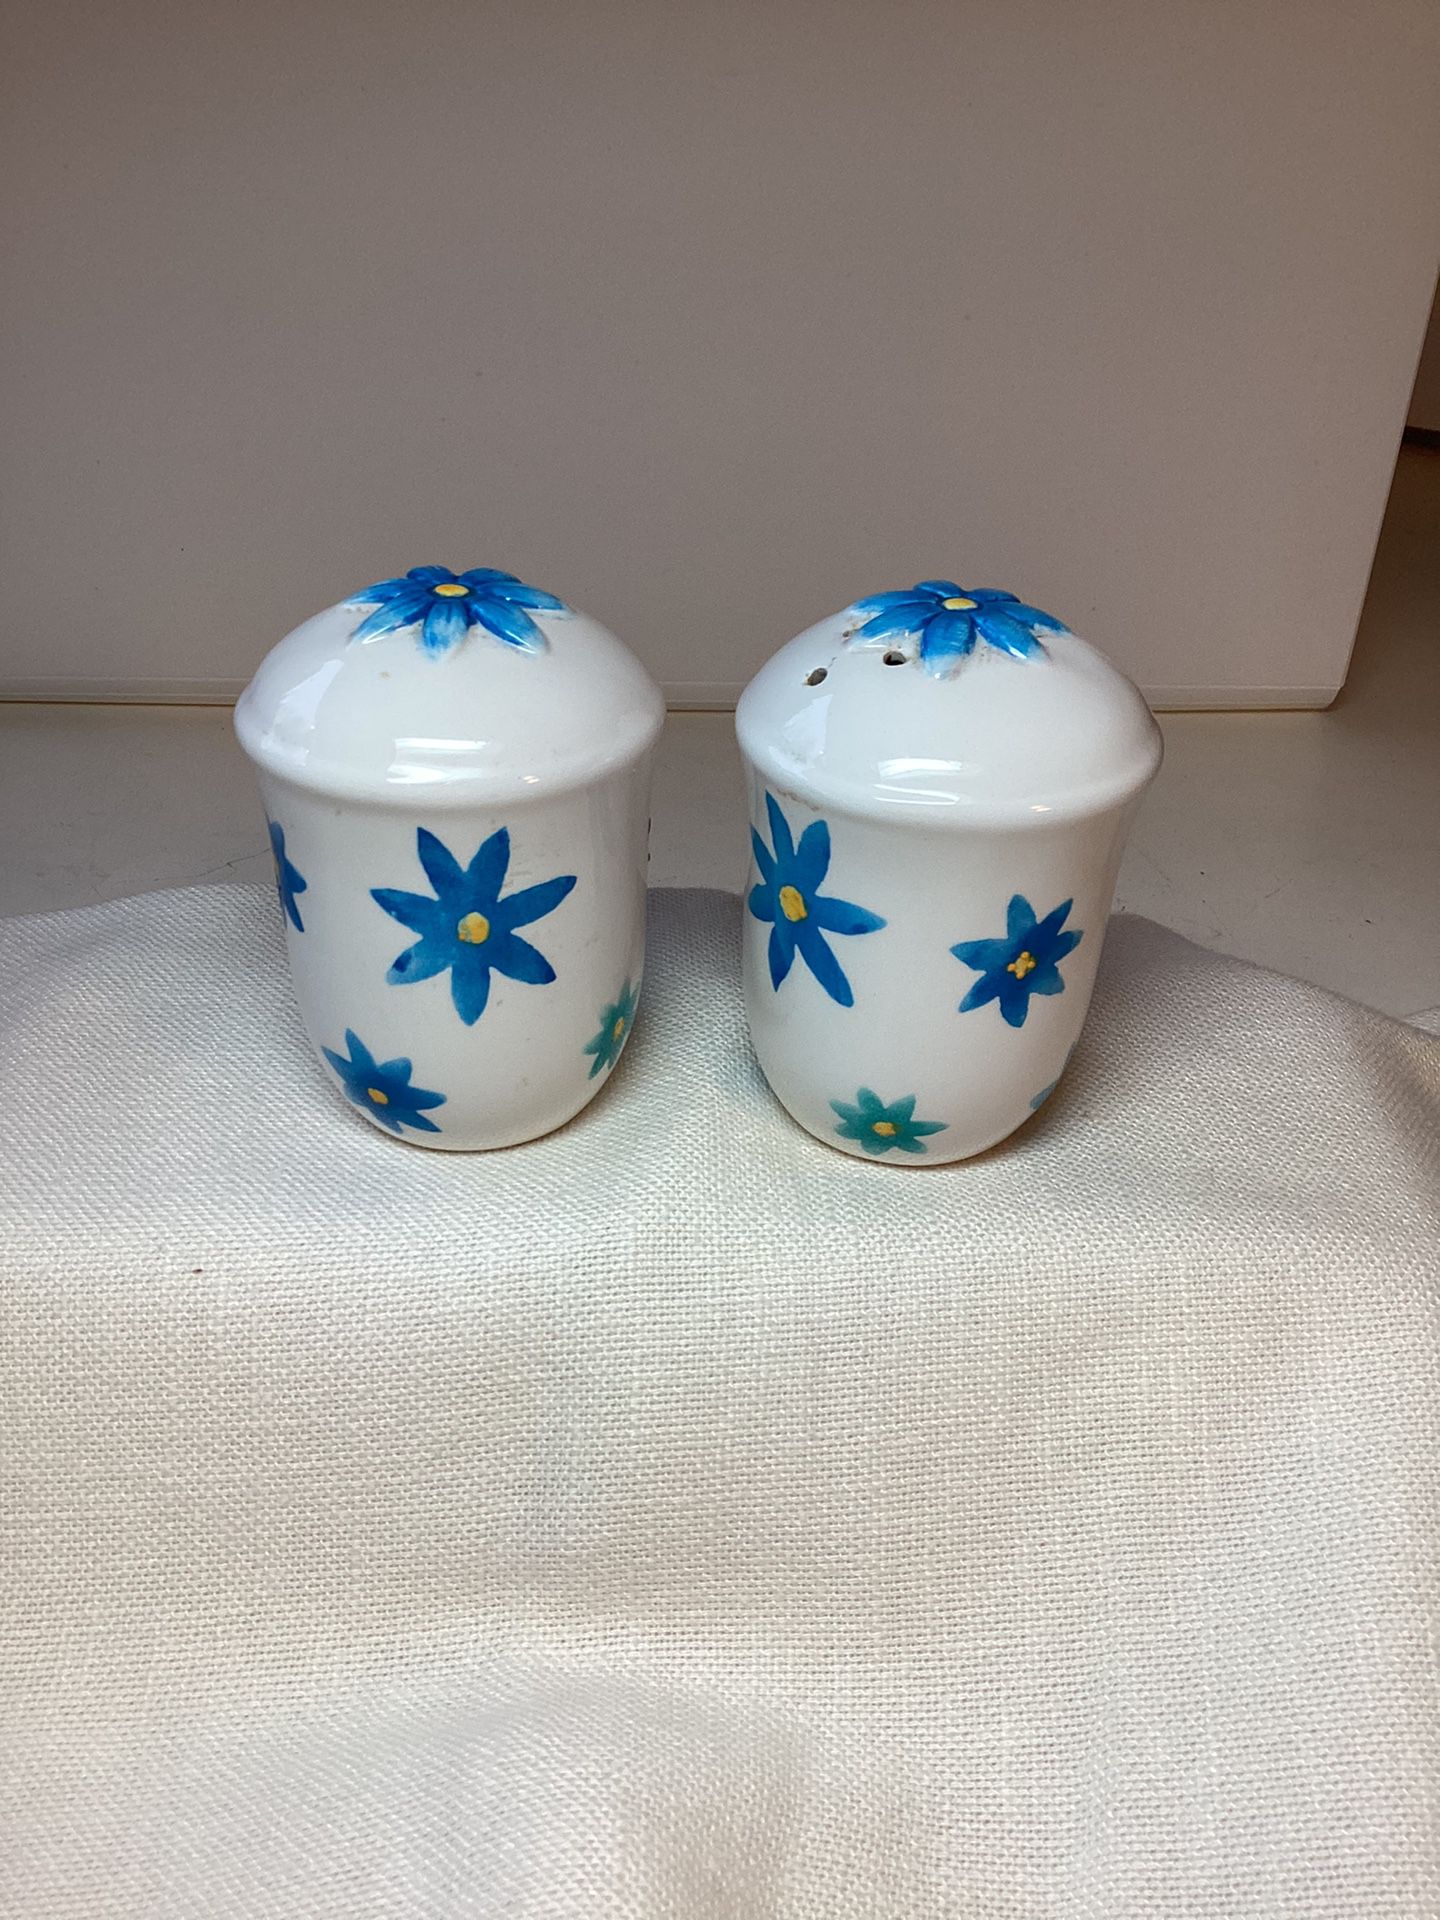 Groovy Vintage Retro Blue Daisy Salt And Pepper Shakers With Plugs